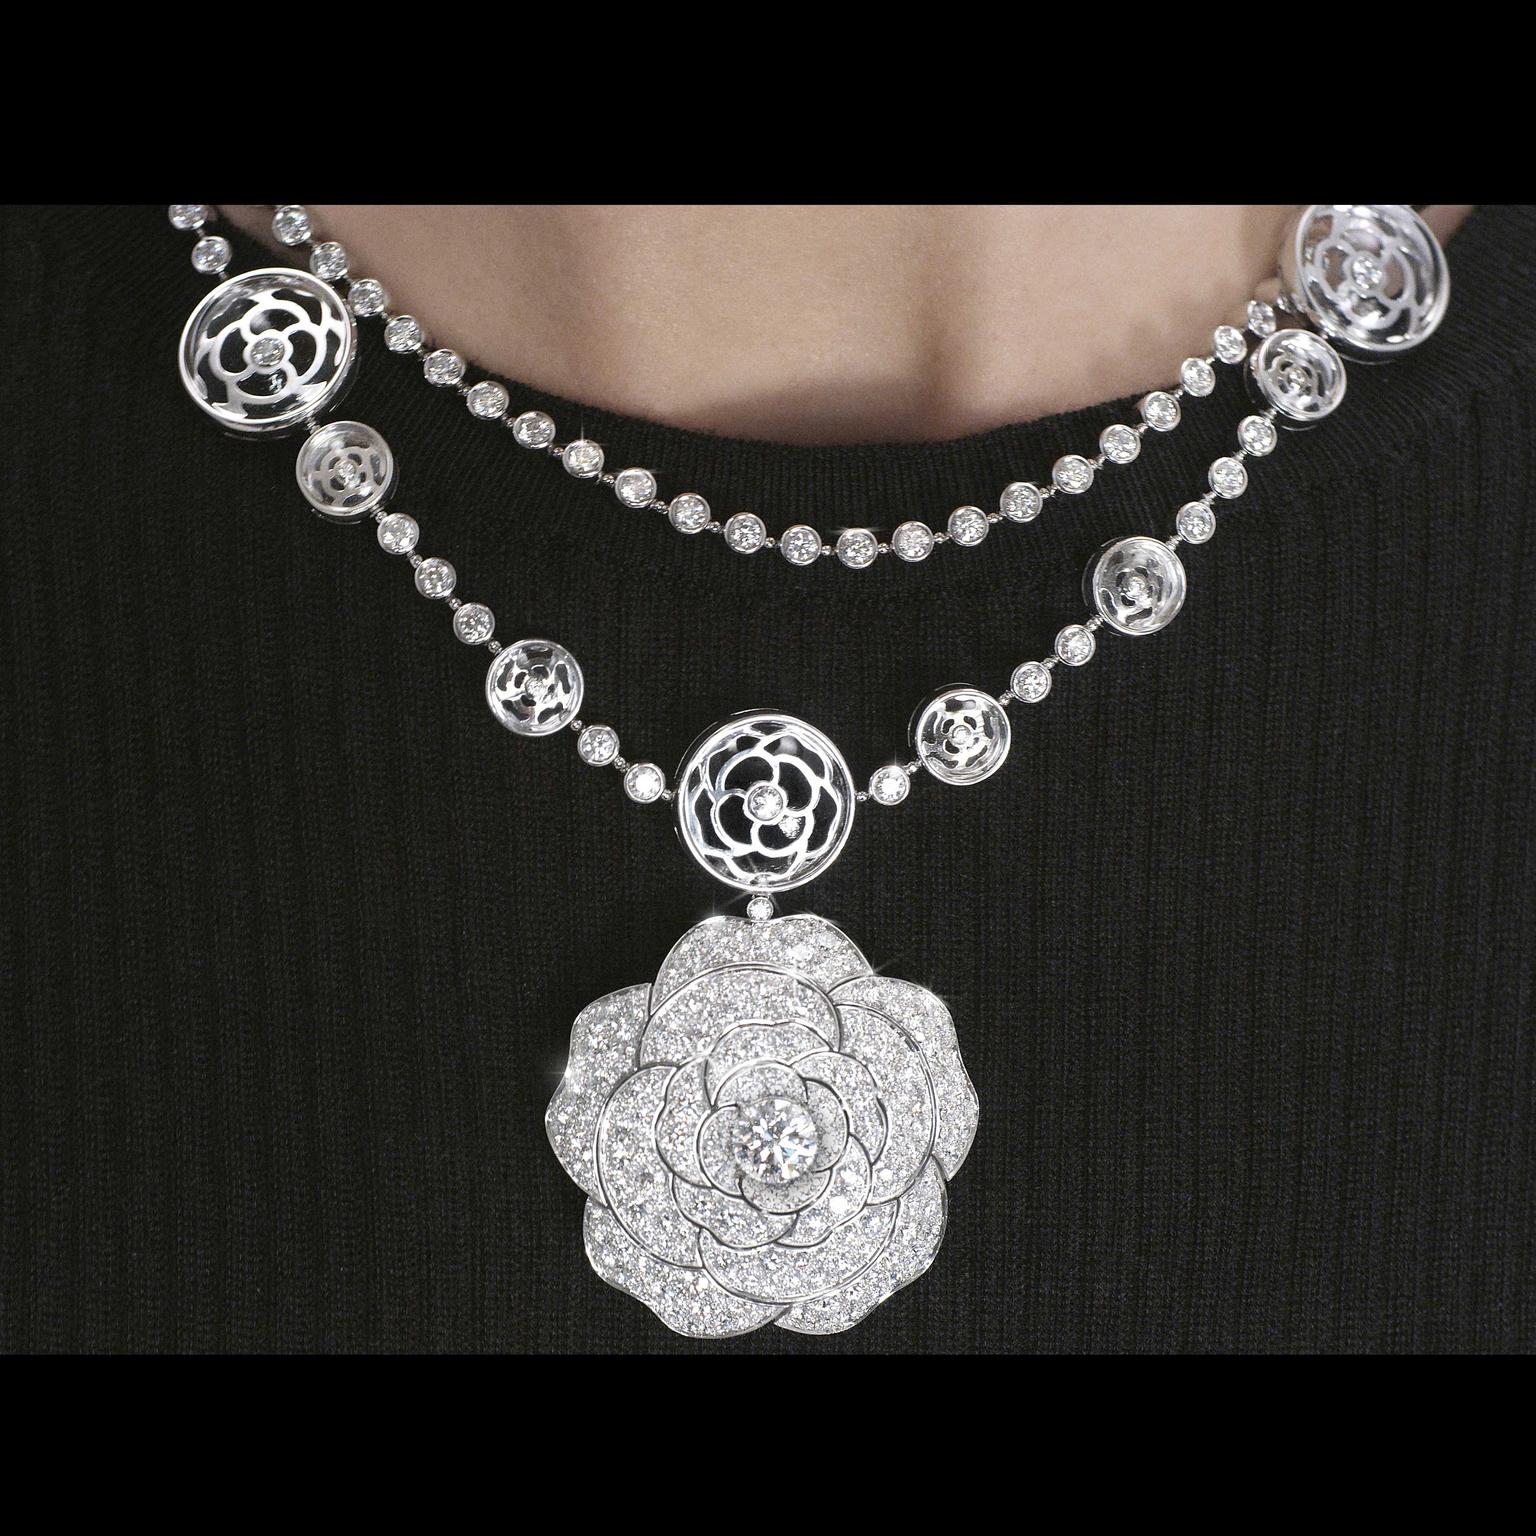 Chanel 1 5 Cristal Illusion white gold and diamond necklace double row